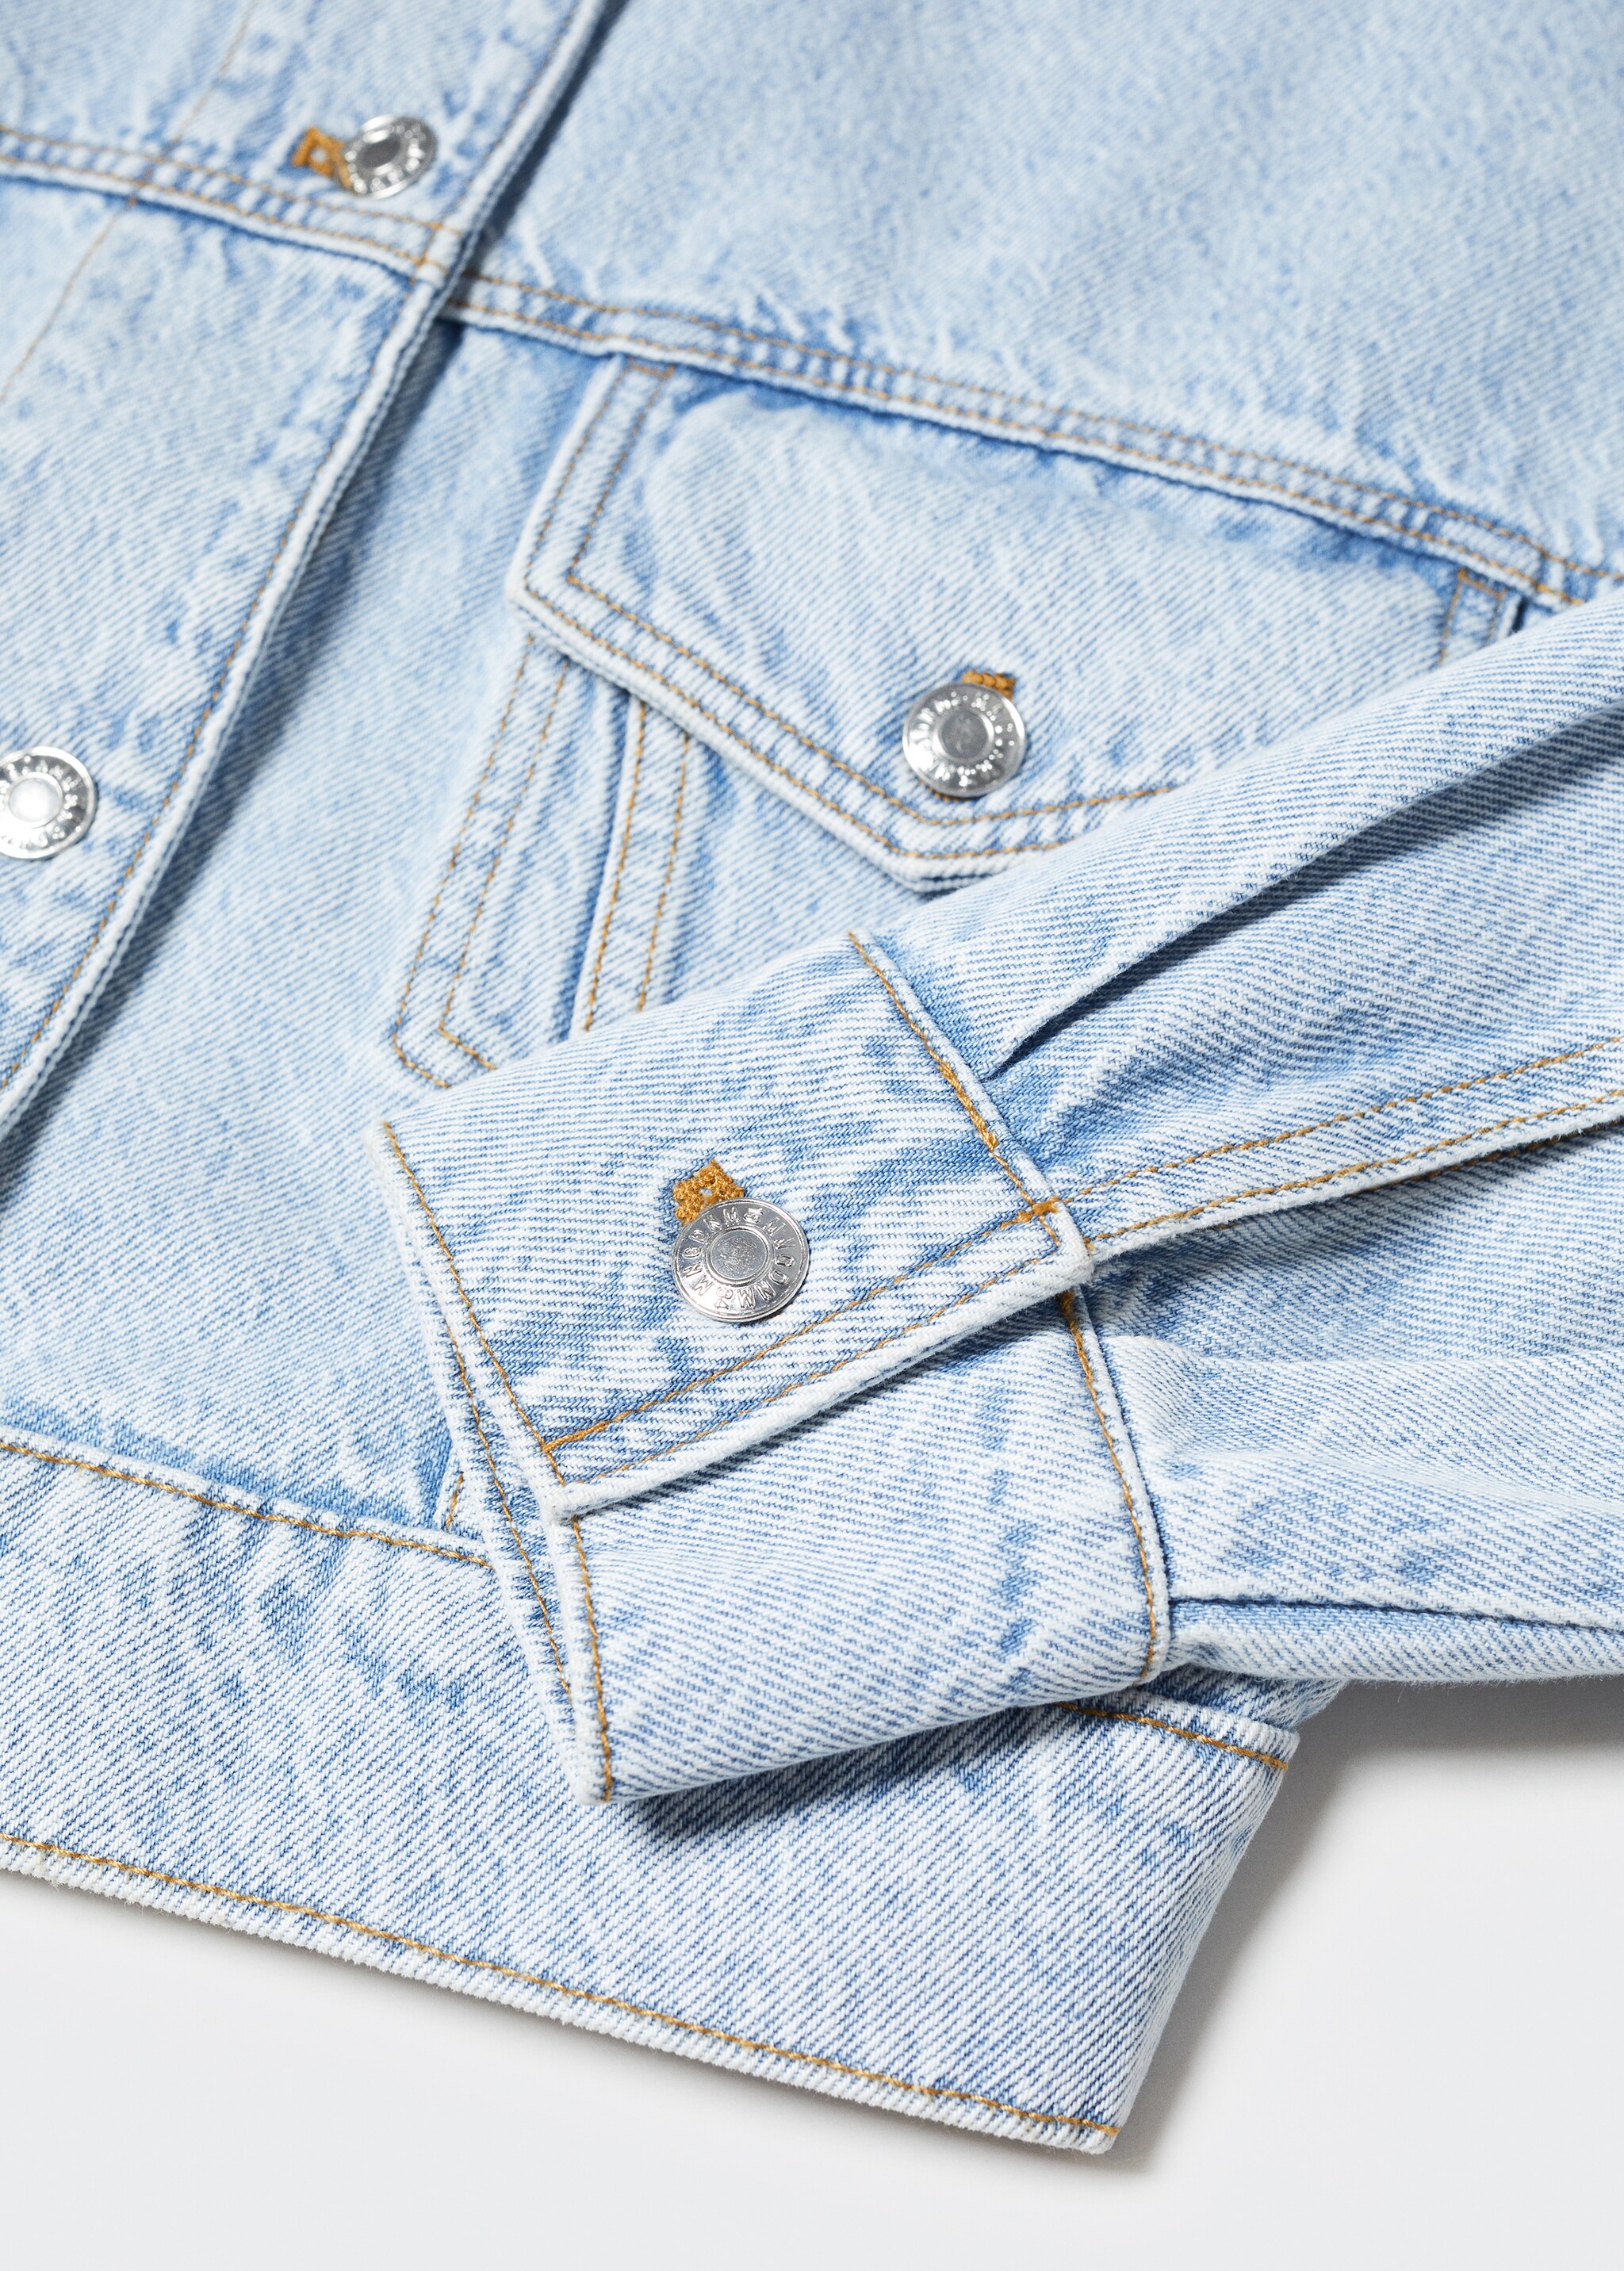 Cropped denim jacket - Details of the article 8